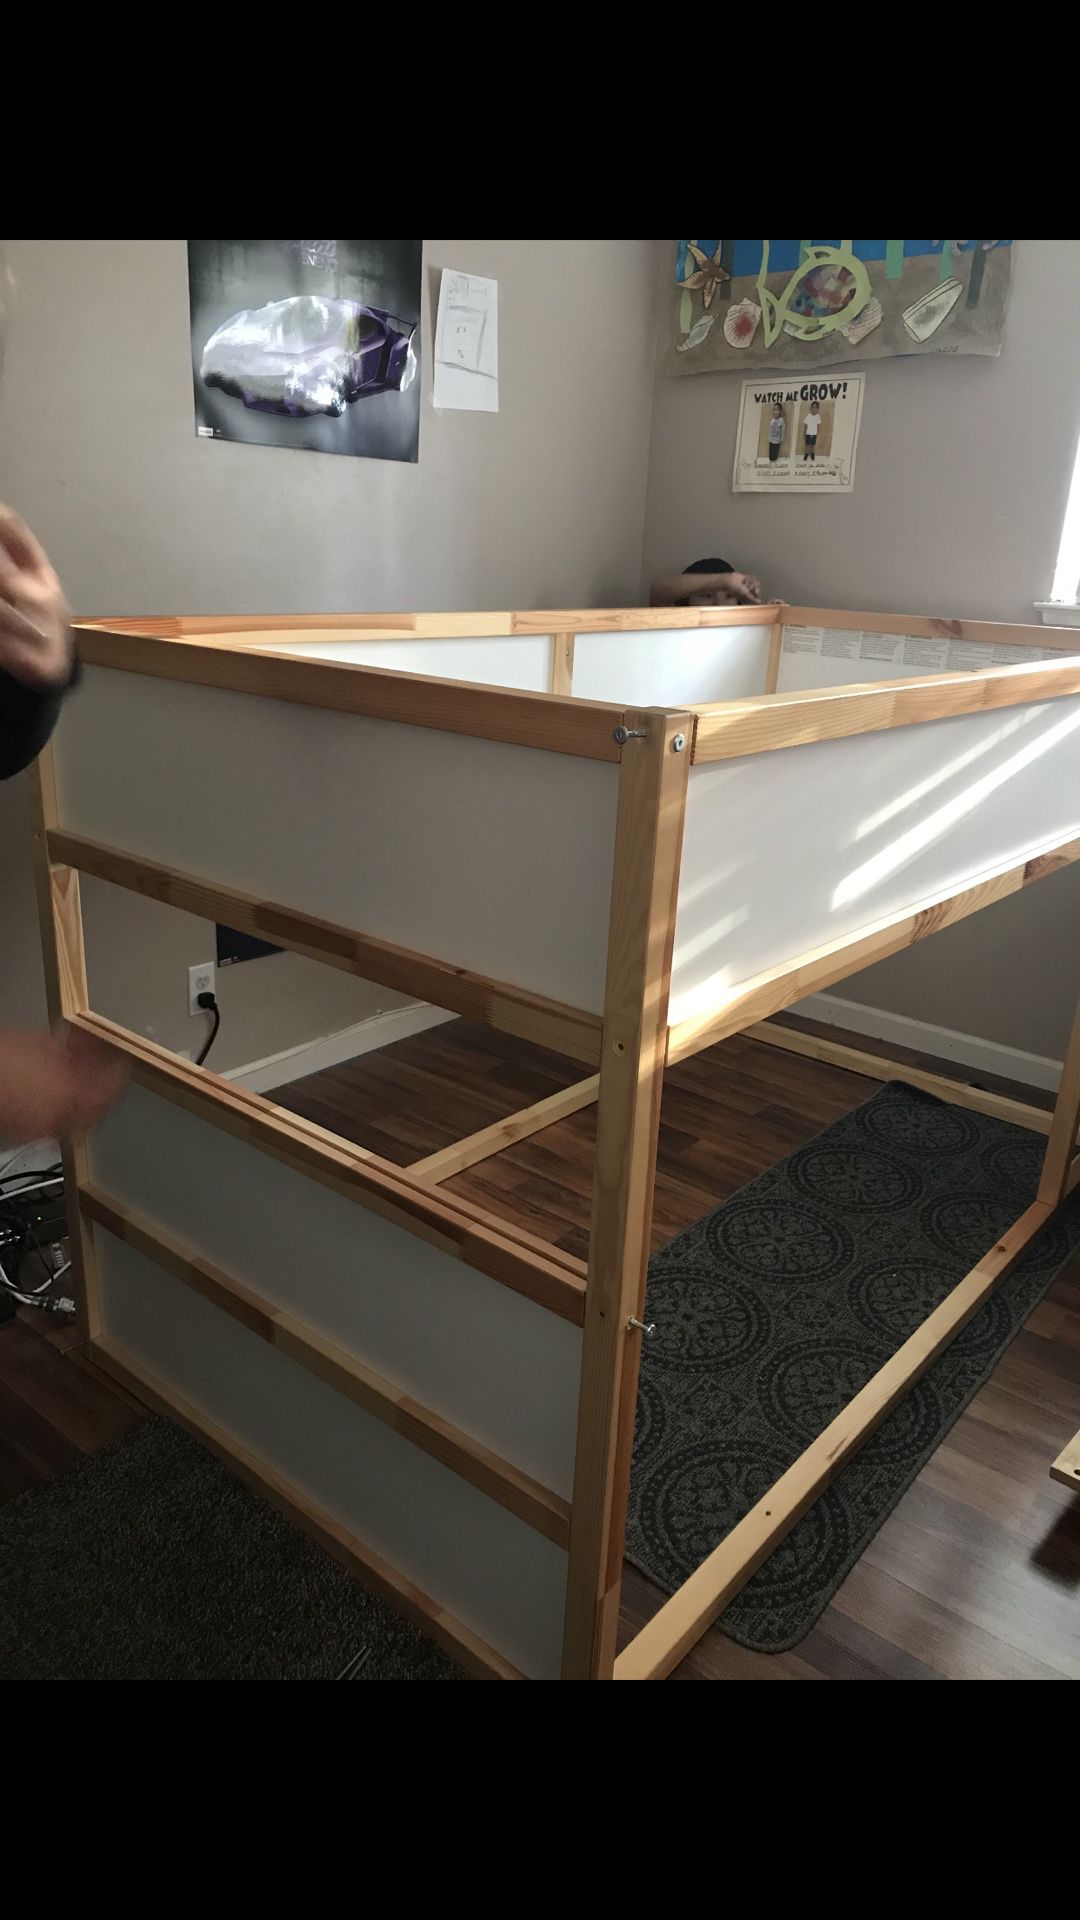 Bunk bed by IKEA